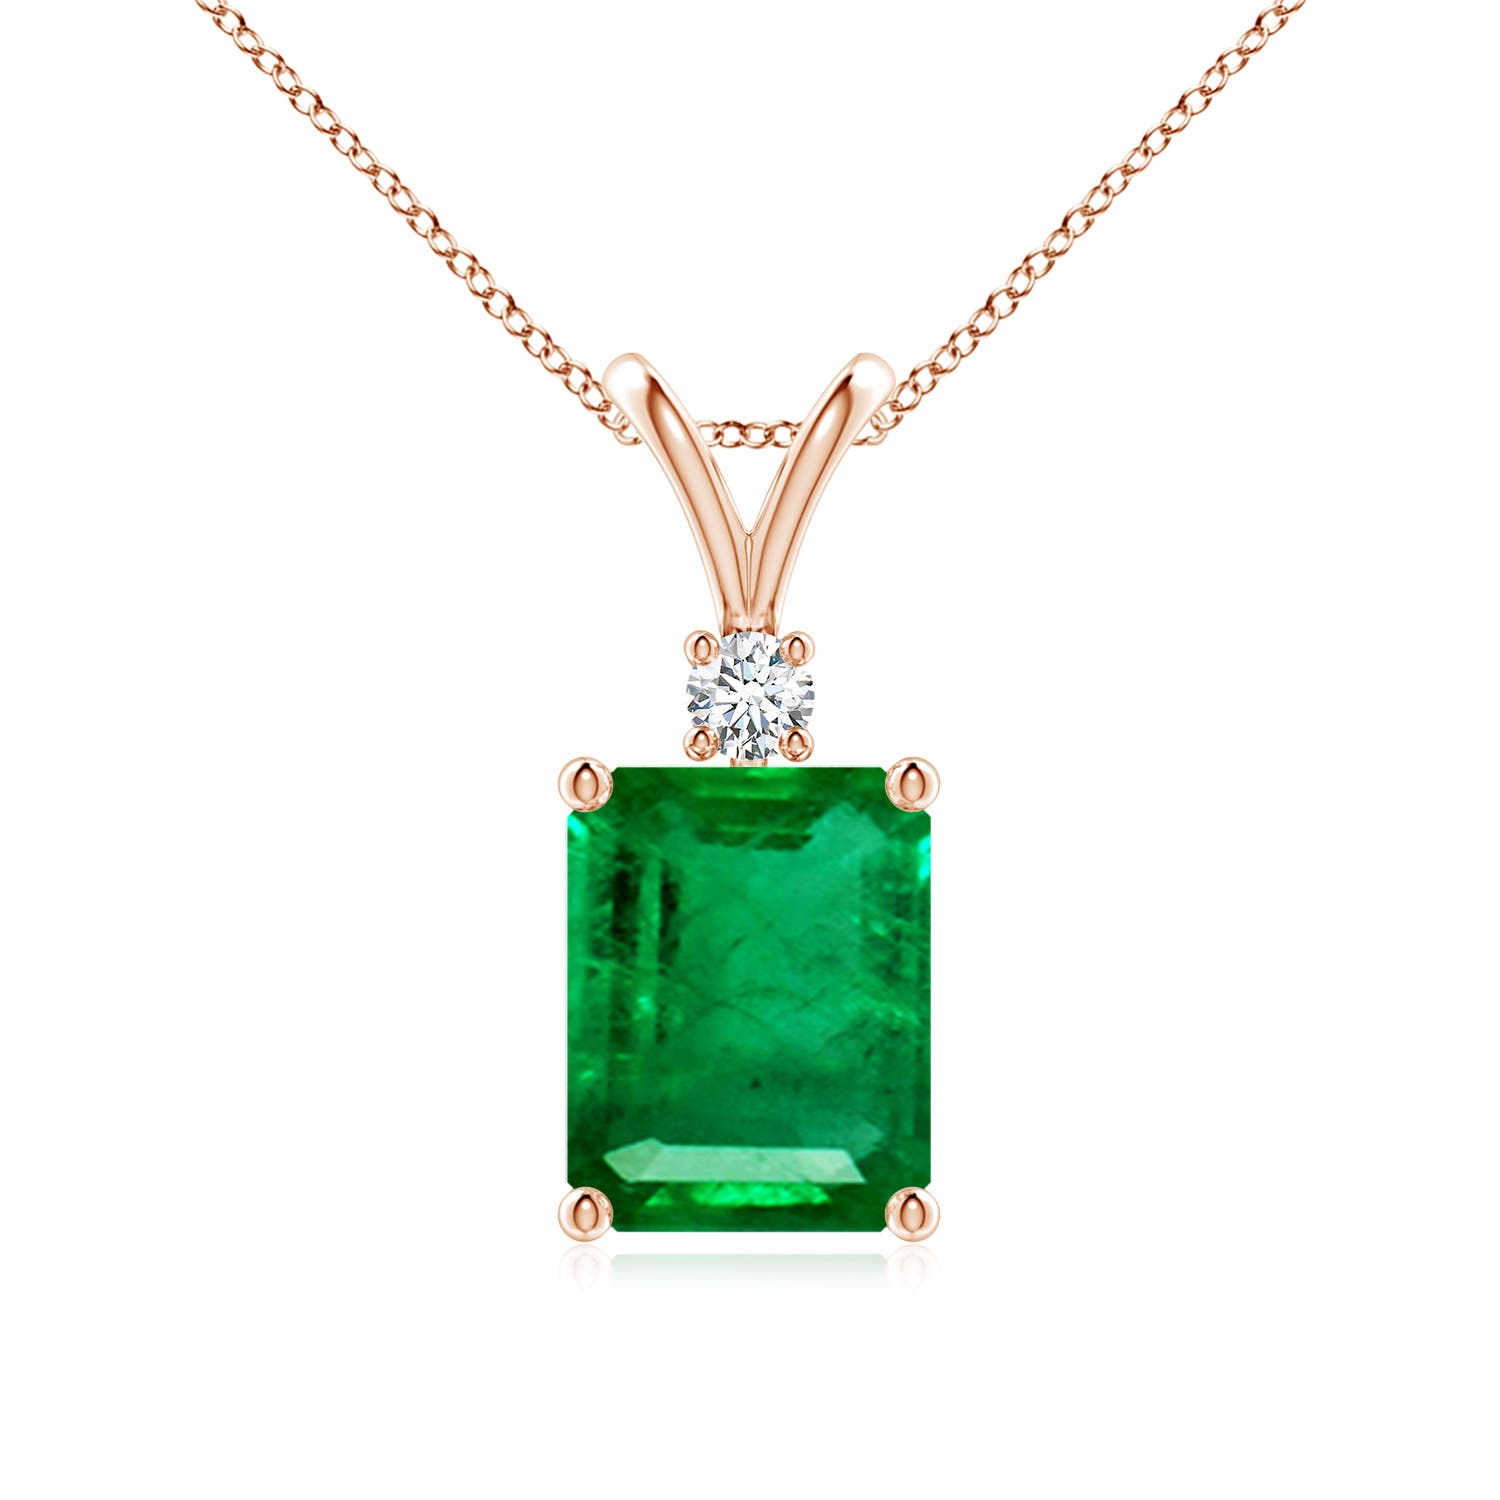 AAA - Emerald / 2.32 CT / 14 KT Rose Gold